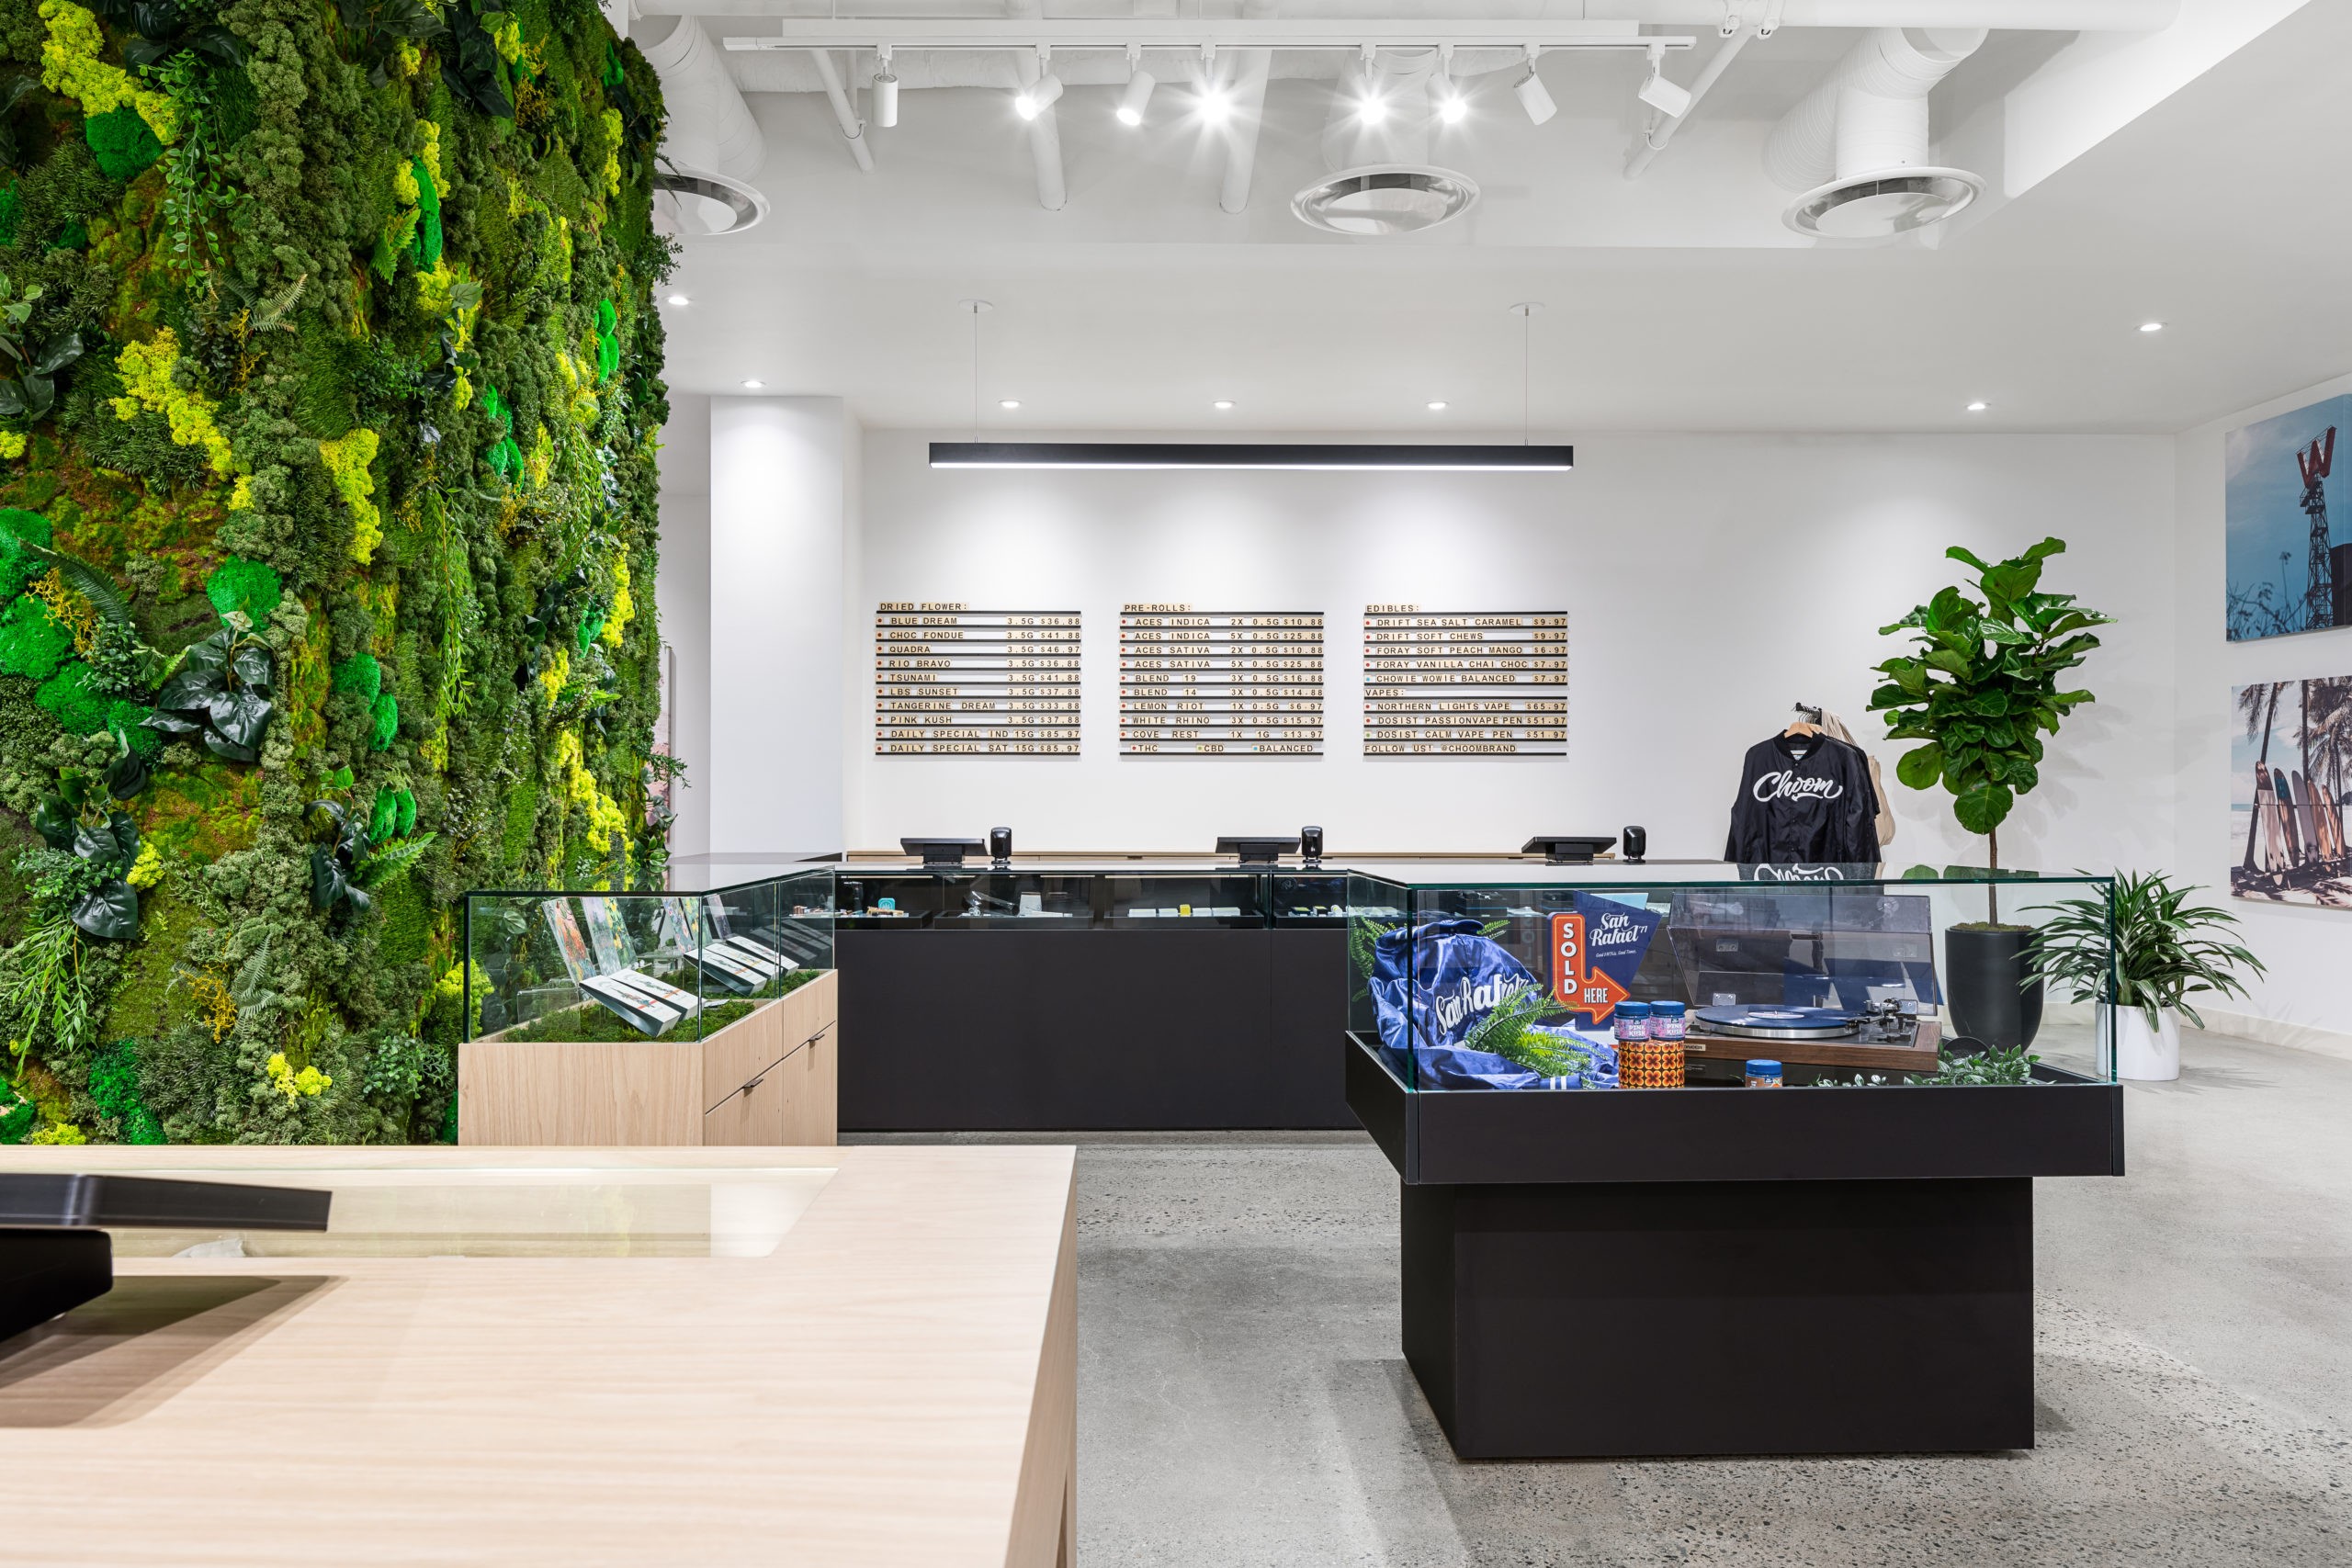 Choom Olympic Village in Vancouver BC Cannabis Retail Design & Architecture Signage and point of sale by Cutler